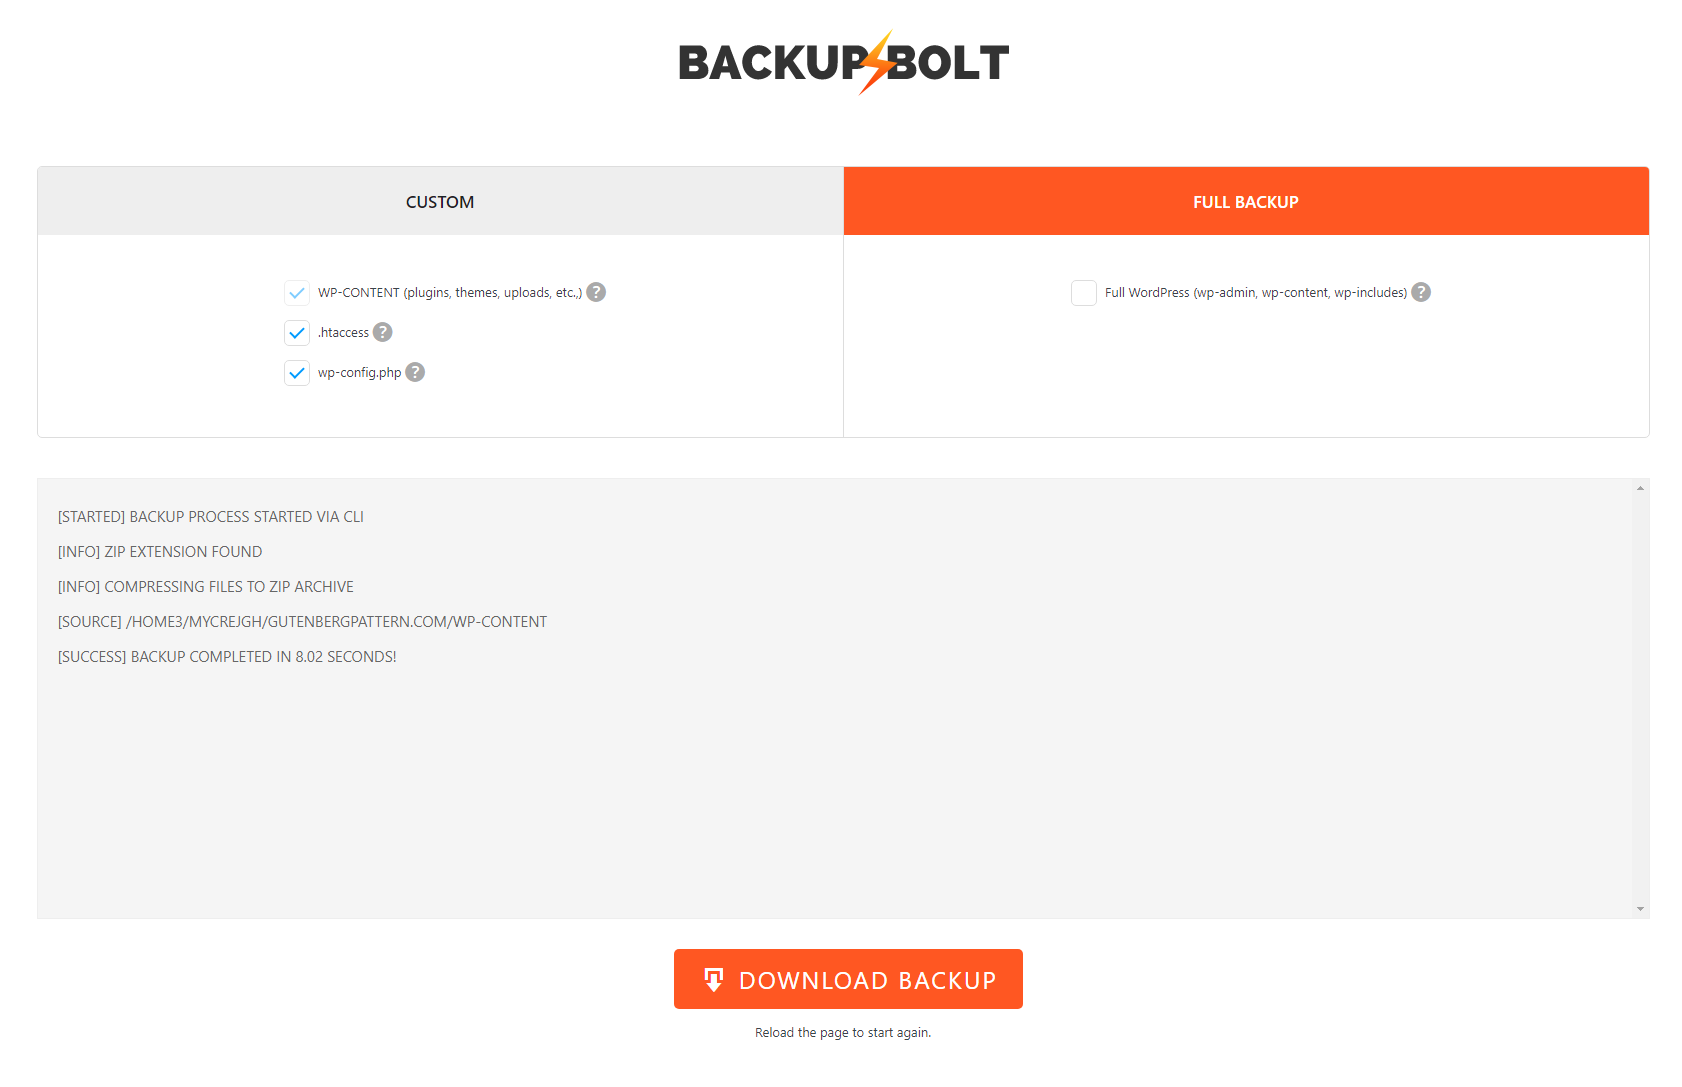 Download the backup instantly in zip format